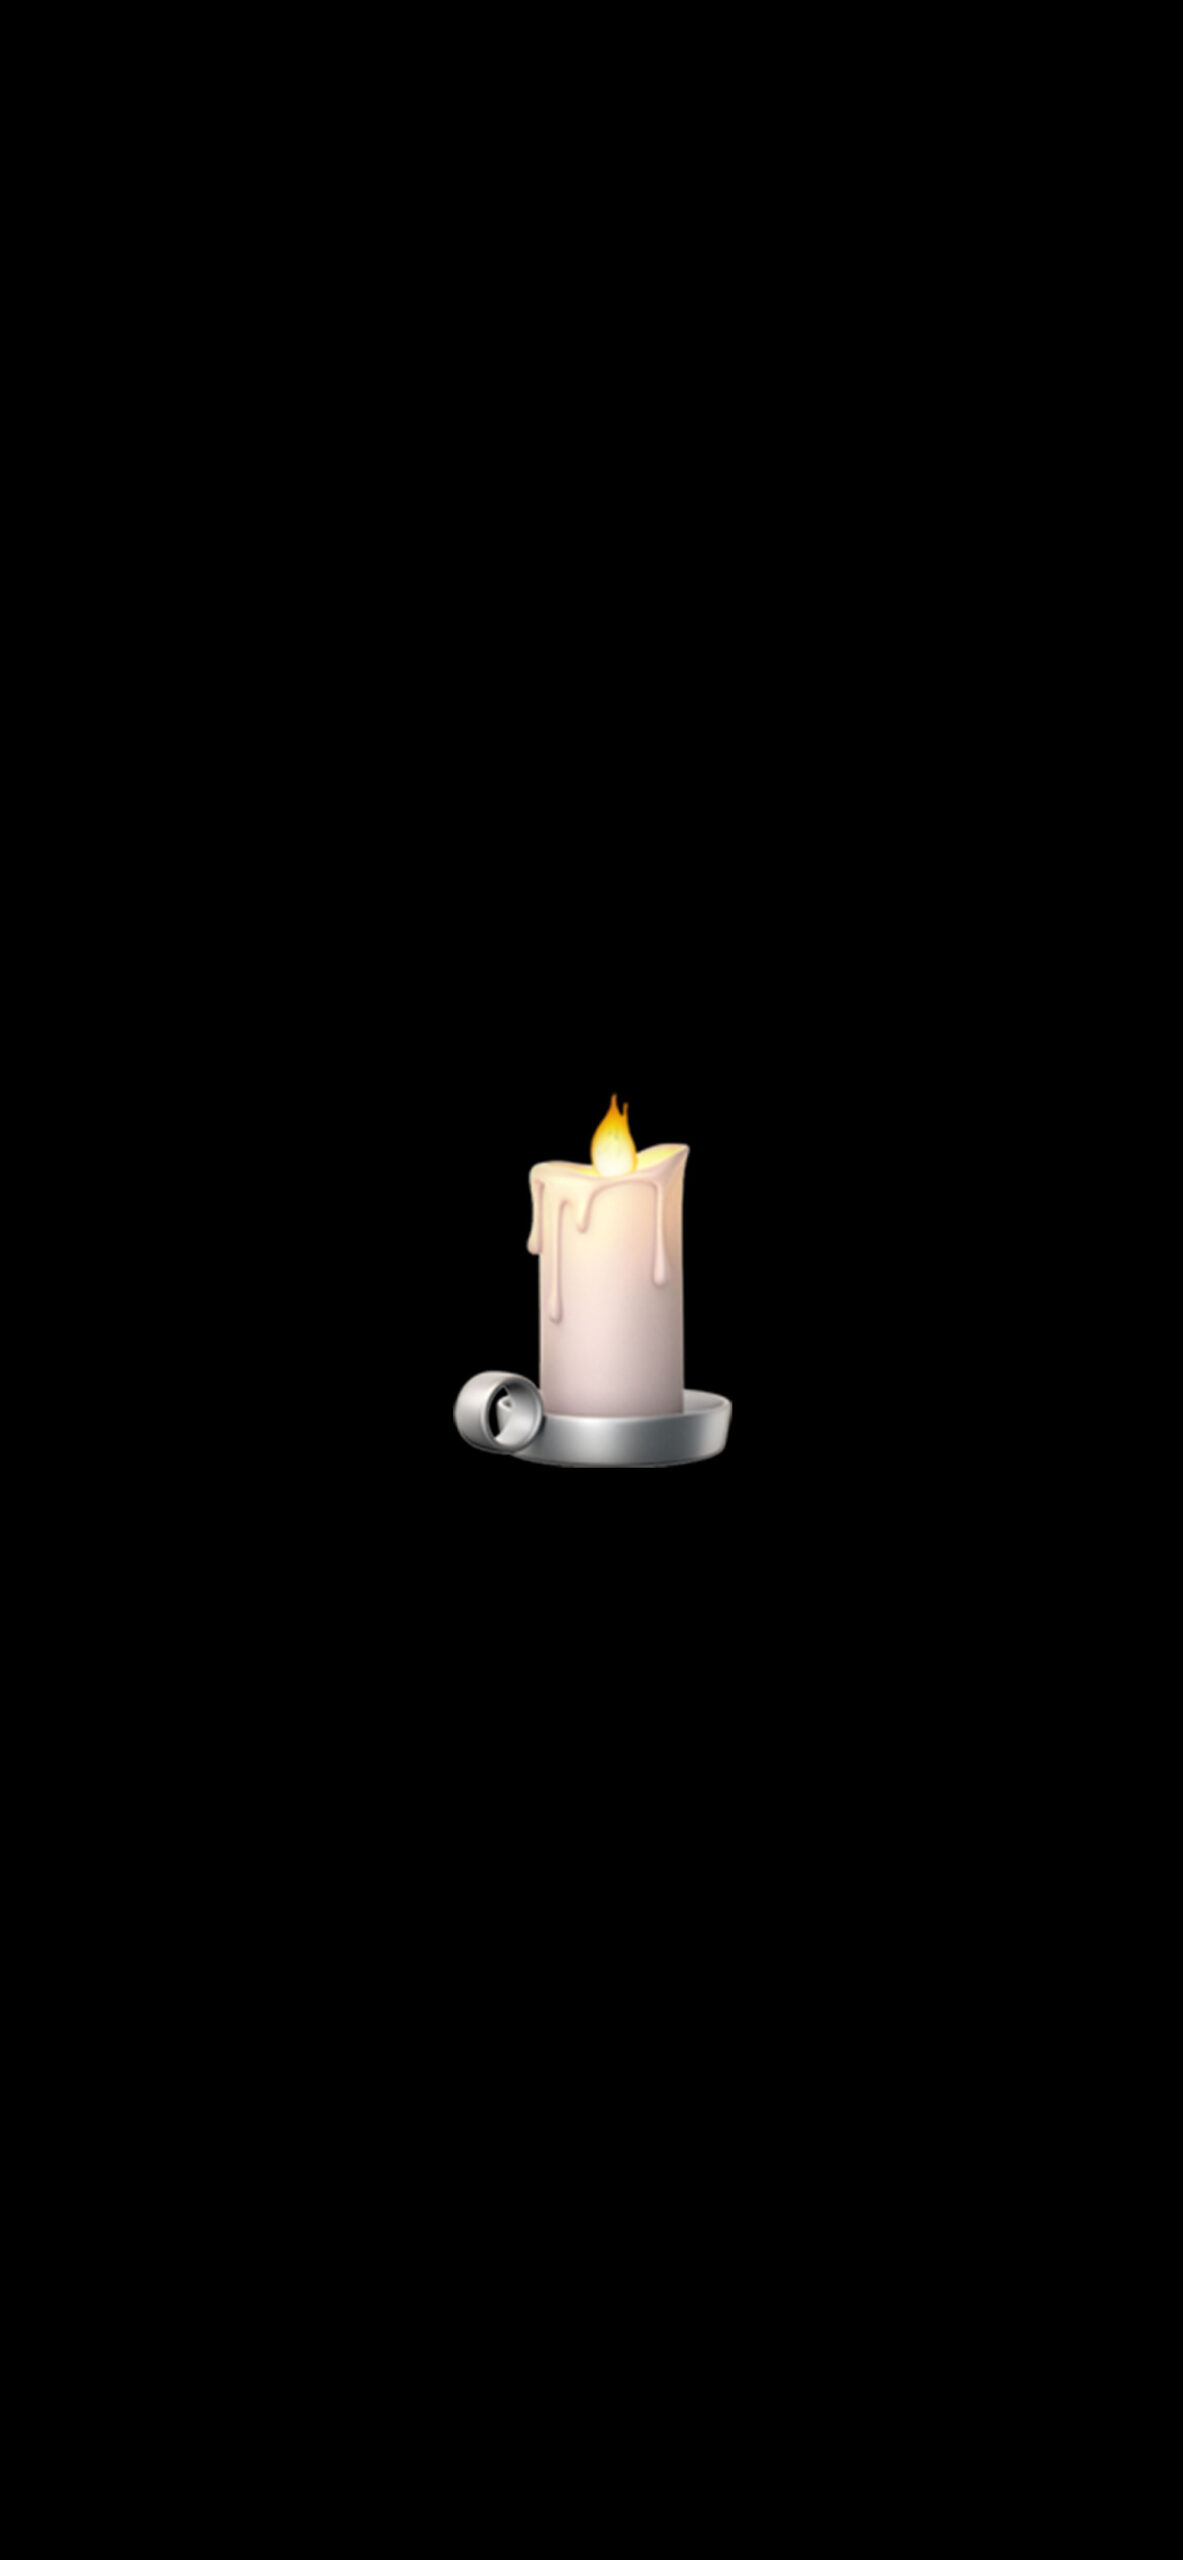 Minimalist Emoji Wallpaper with Ghost, Candle & Castle - Black Wallpapers